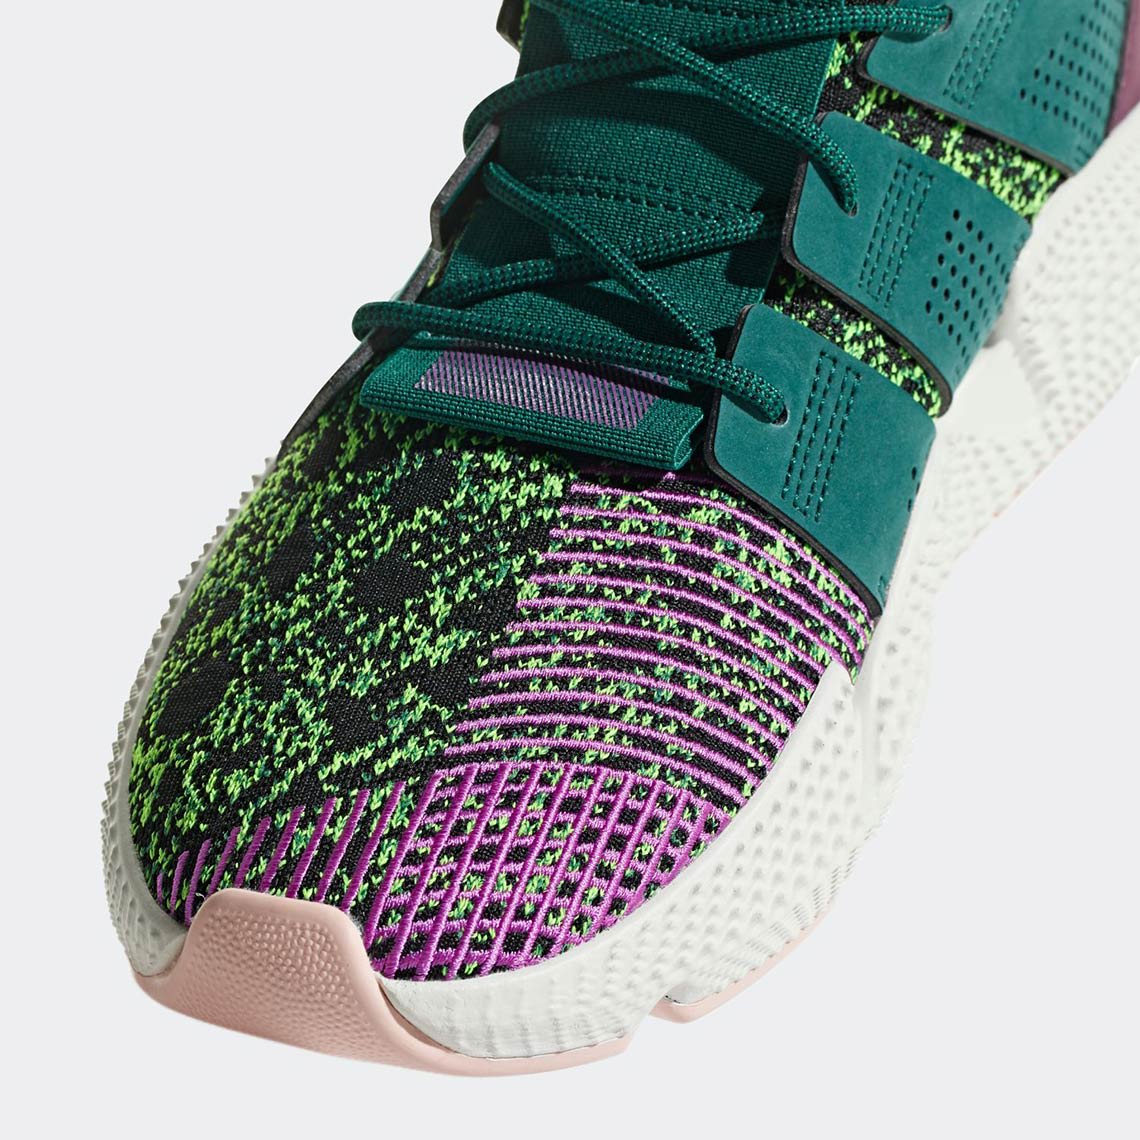 The Next Wave of Dragon Ball Z x Adidas Sneakers Will 'Cell' Prophere Complex